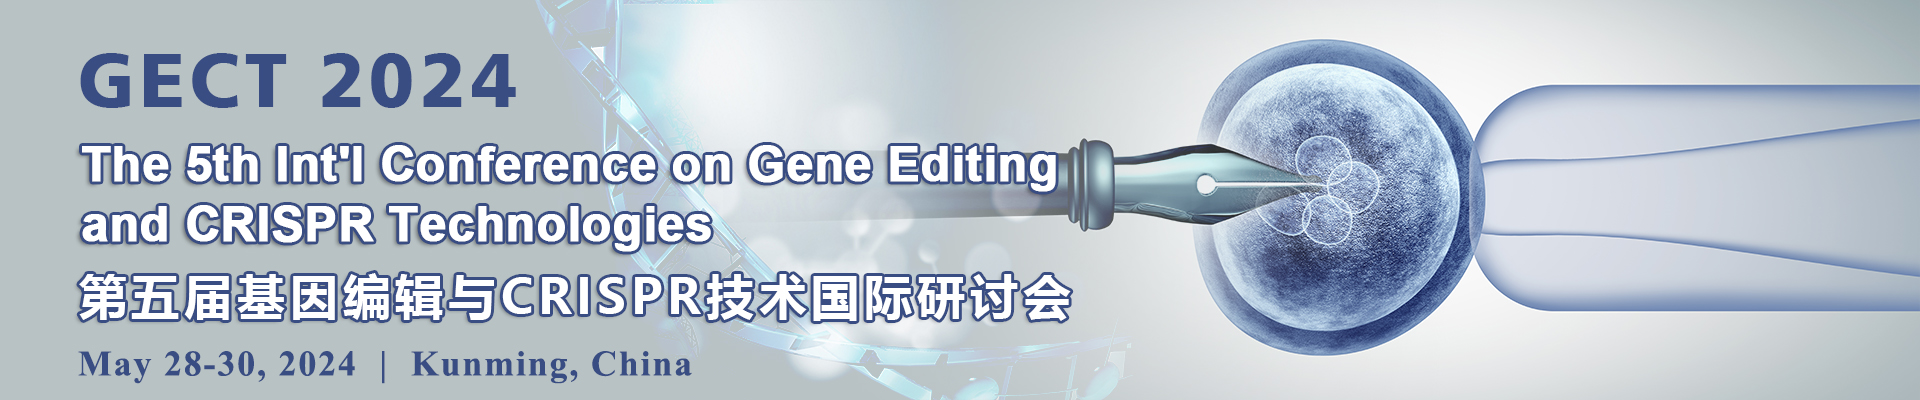 The 5th Int'l Conference on Gene Editing and CRISPR Technologies (GECT 2024)